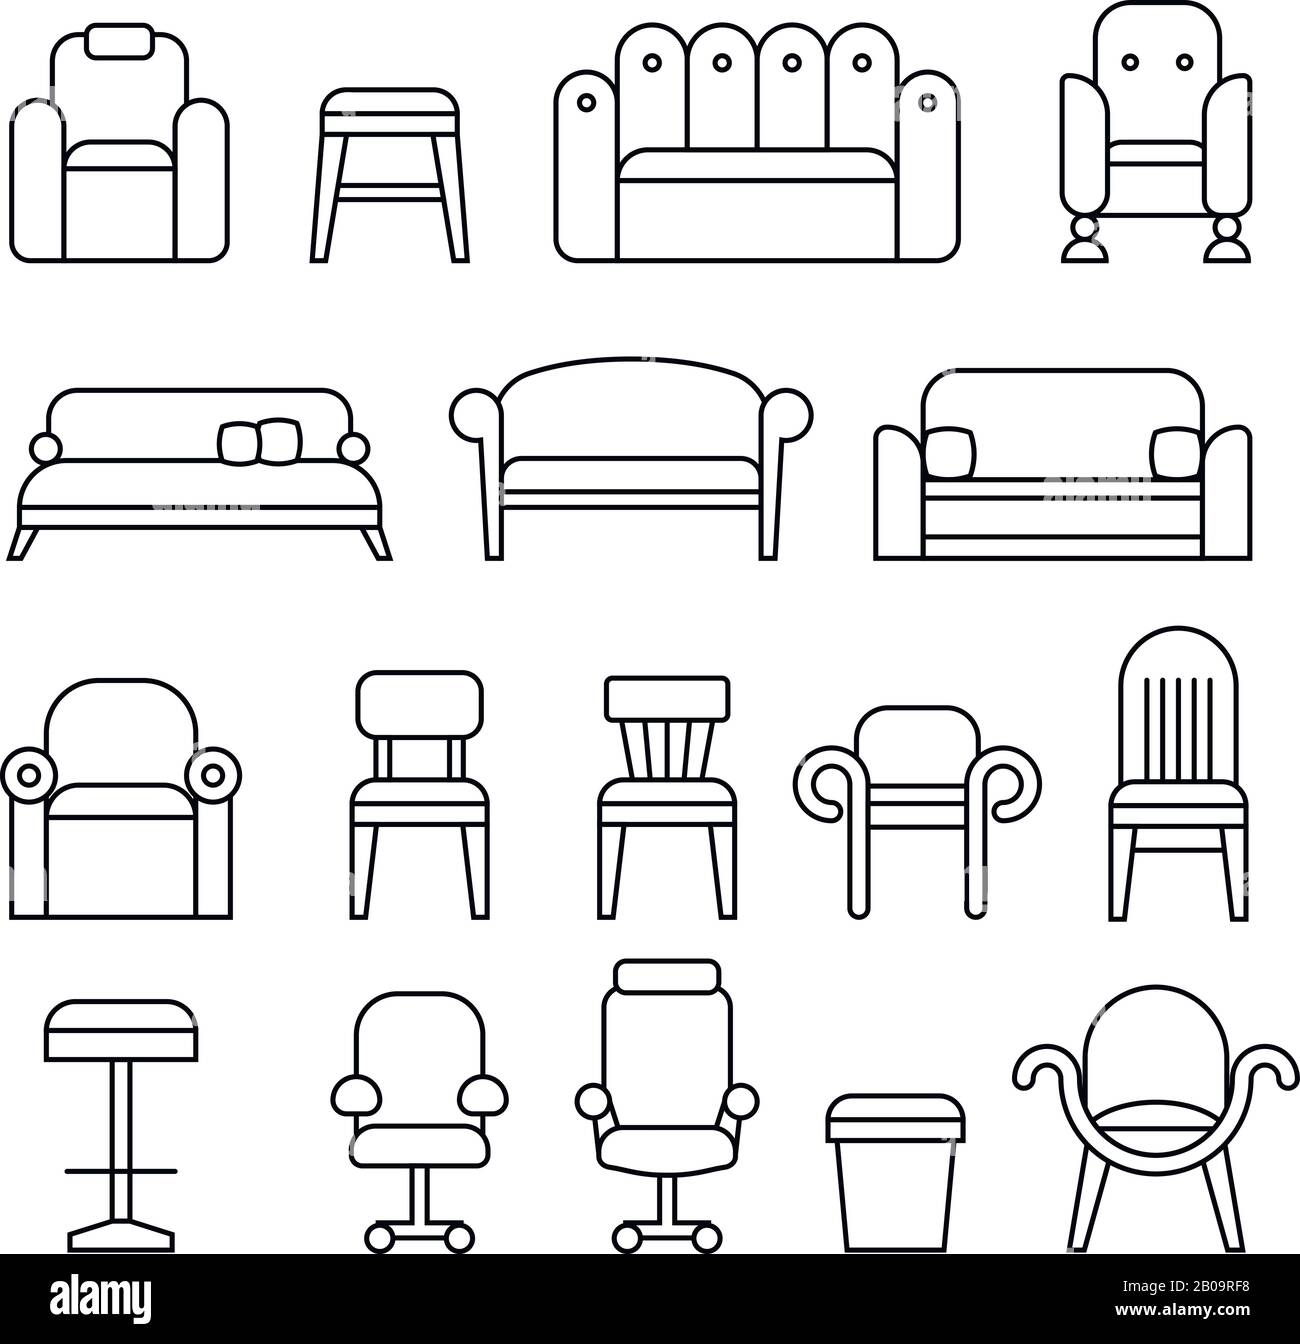 Furniture, chair, armchair, lounge, sofa, couch line vector icons. Linear furniture for sit, illustration of furnitures for interior Stock Vector